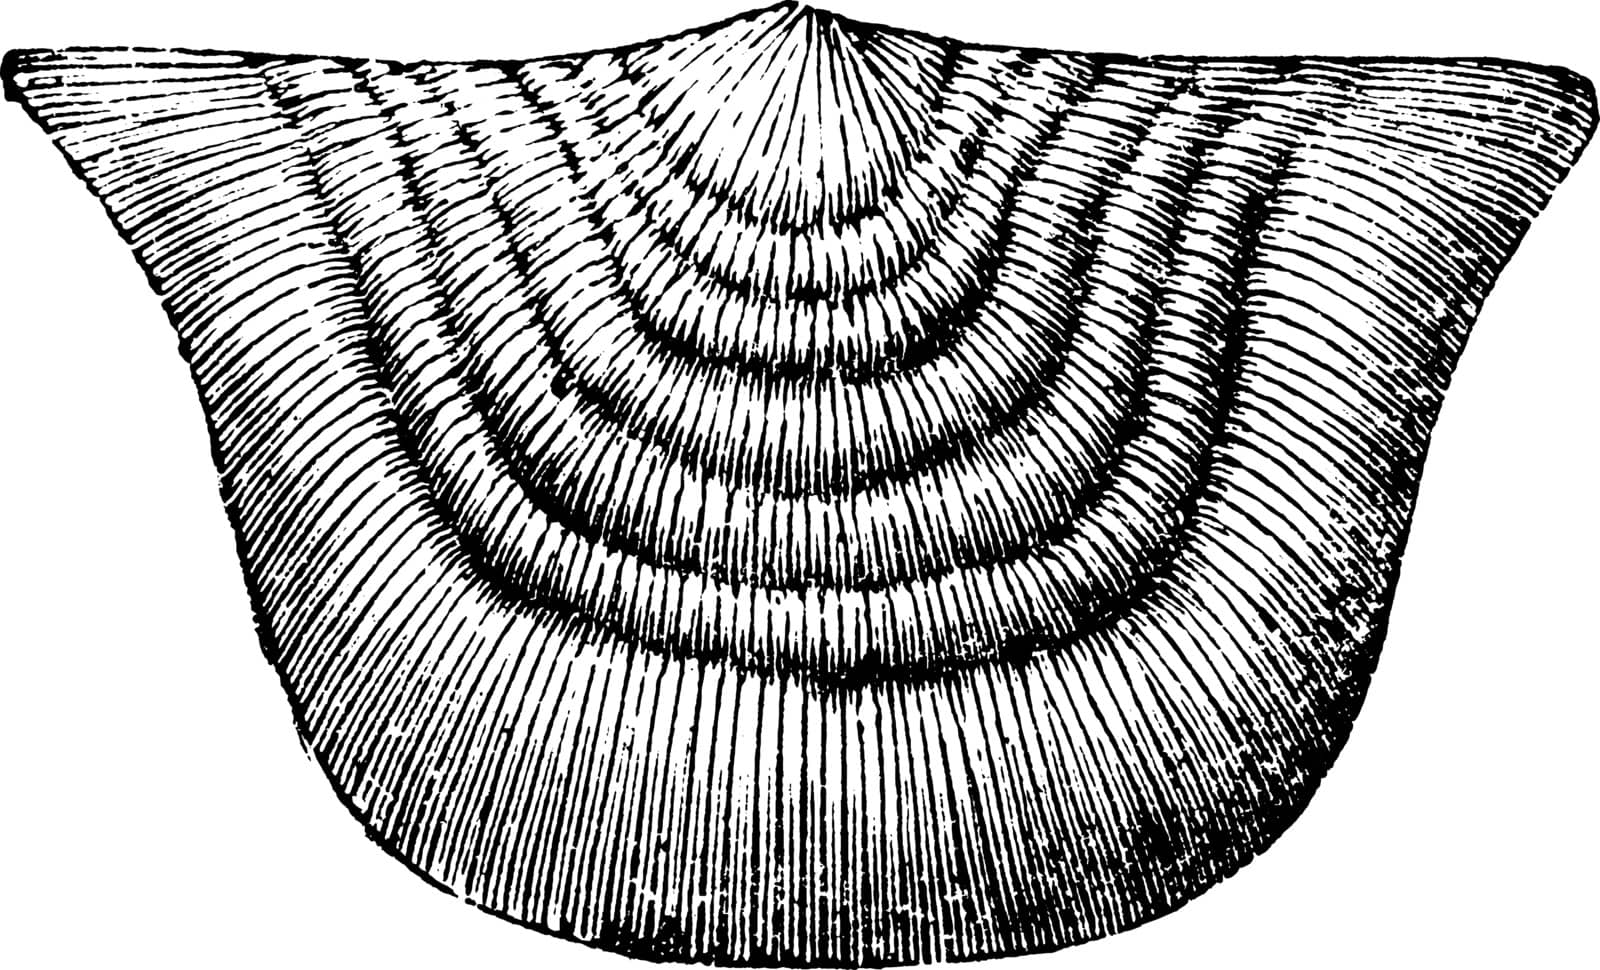 Strophomena Mollusk radiate from the Paleozoic time, vintage line drawing or engraving illustration.